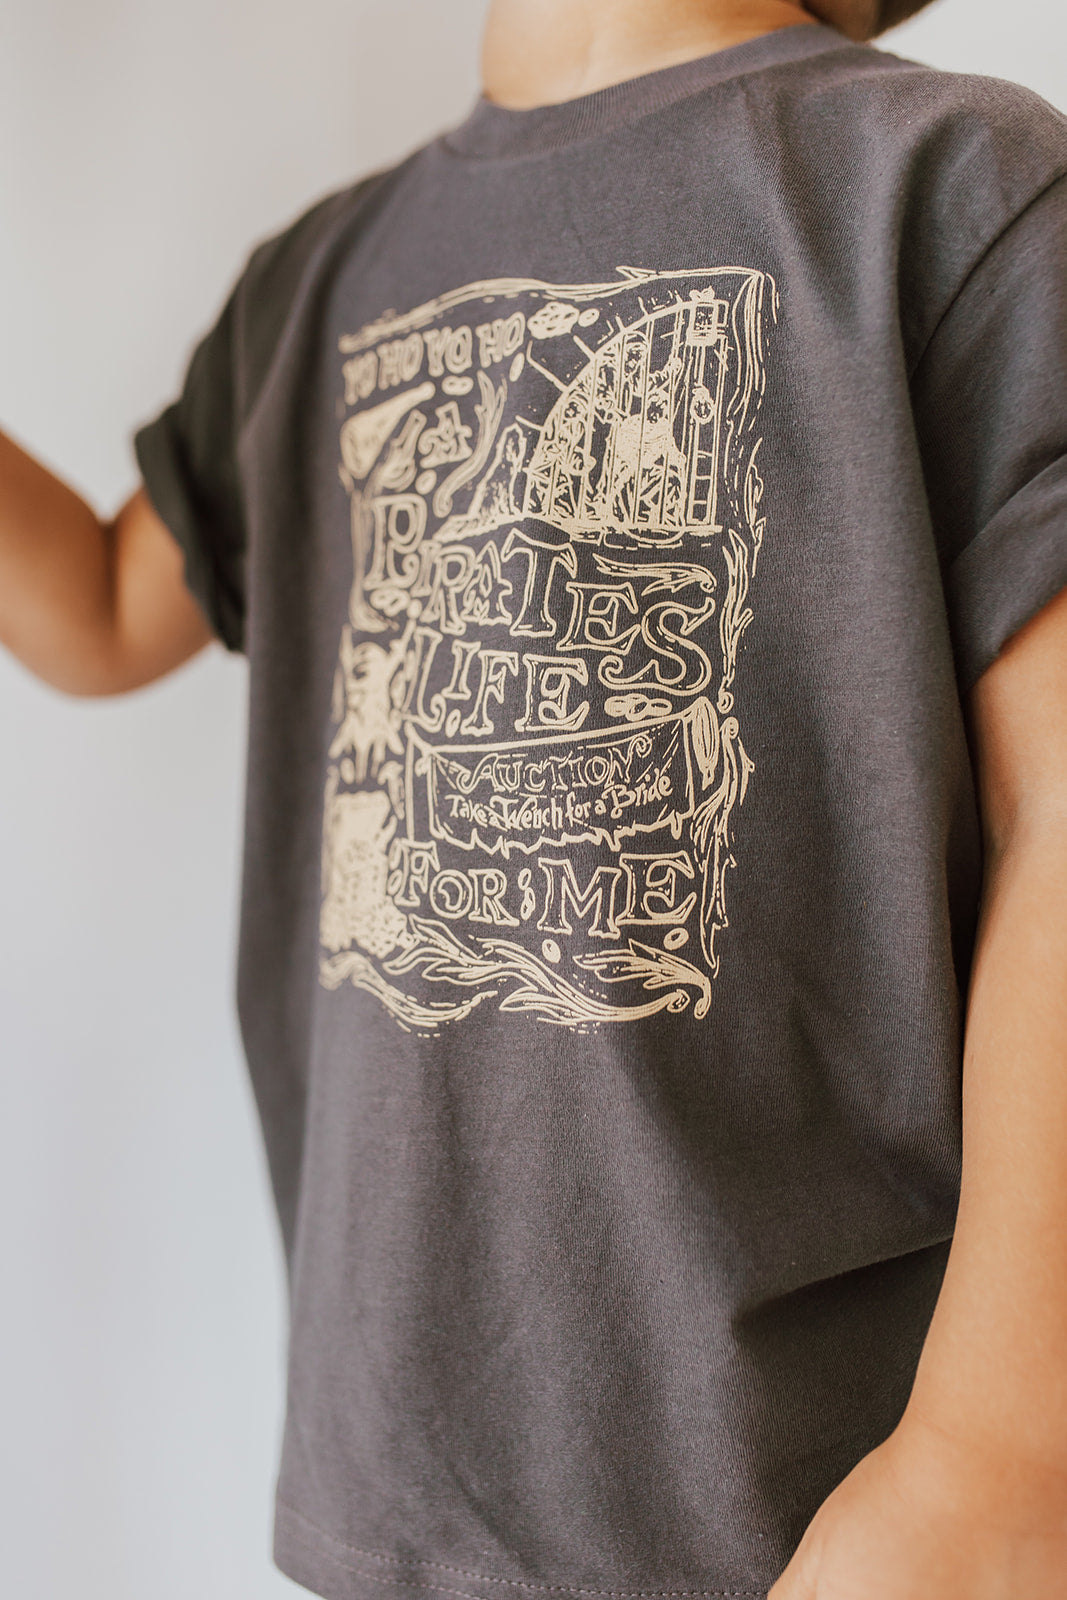 THE PIRATES KIDS TEE BY HAPPY THREADS X PINK DESERT